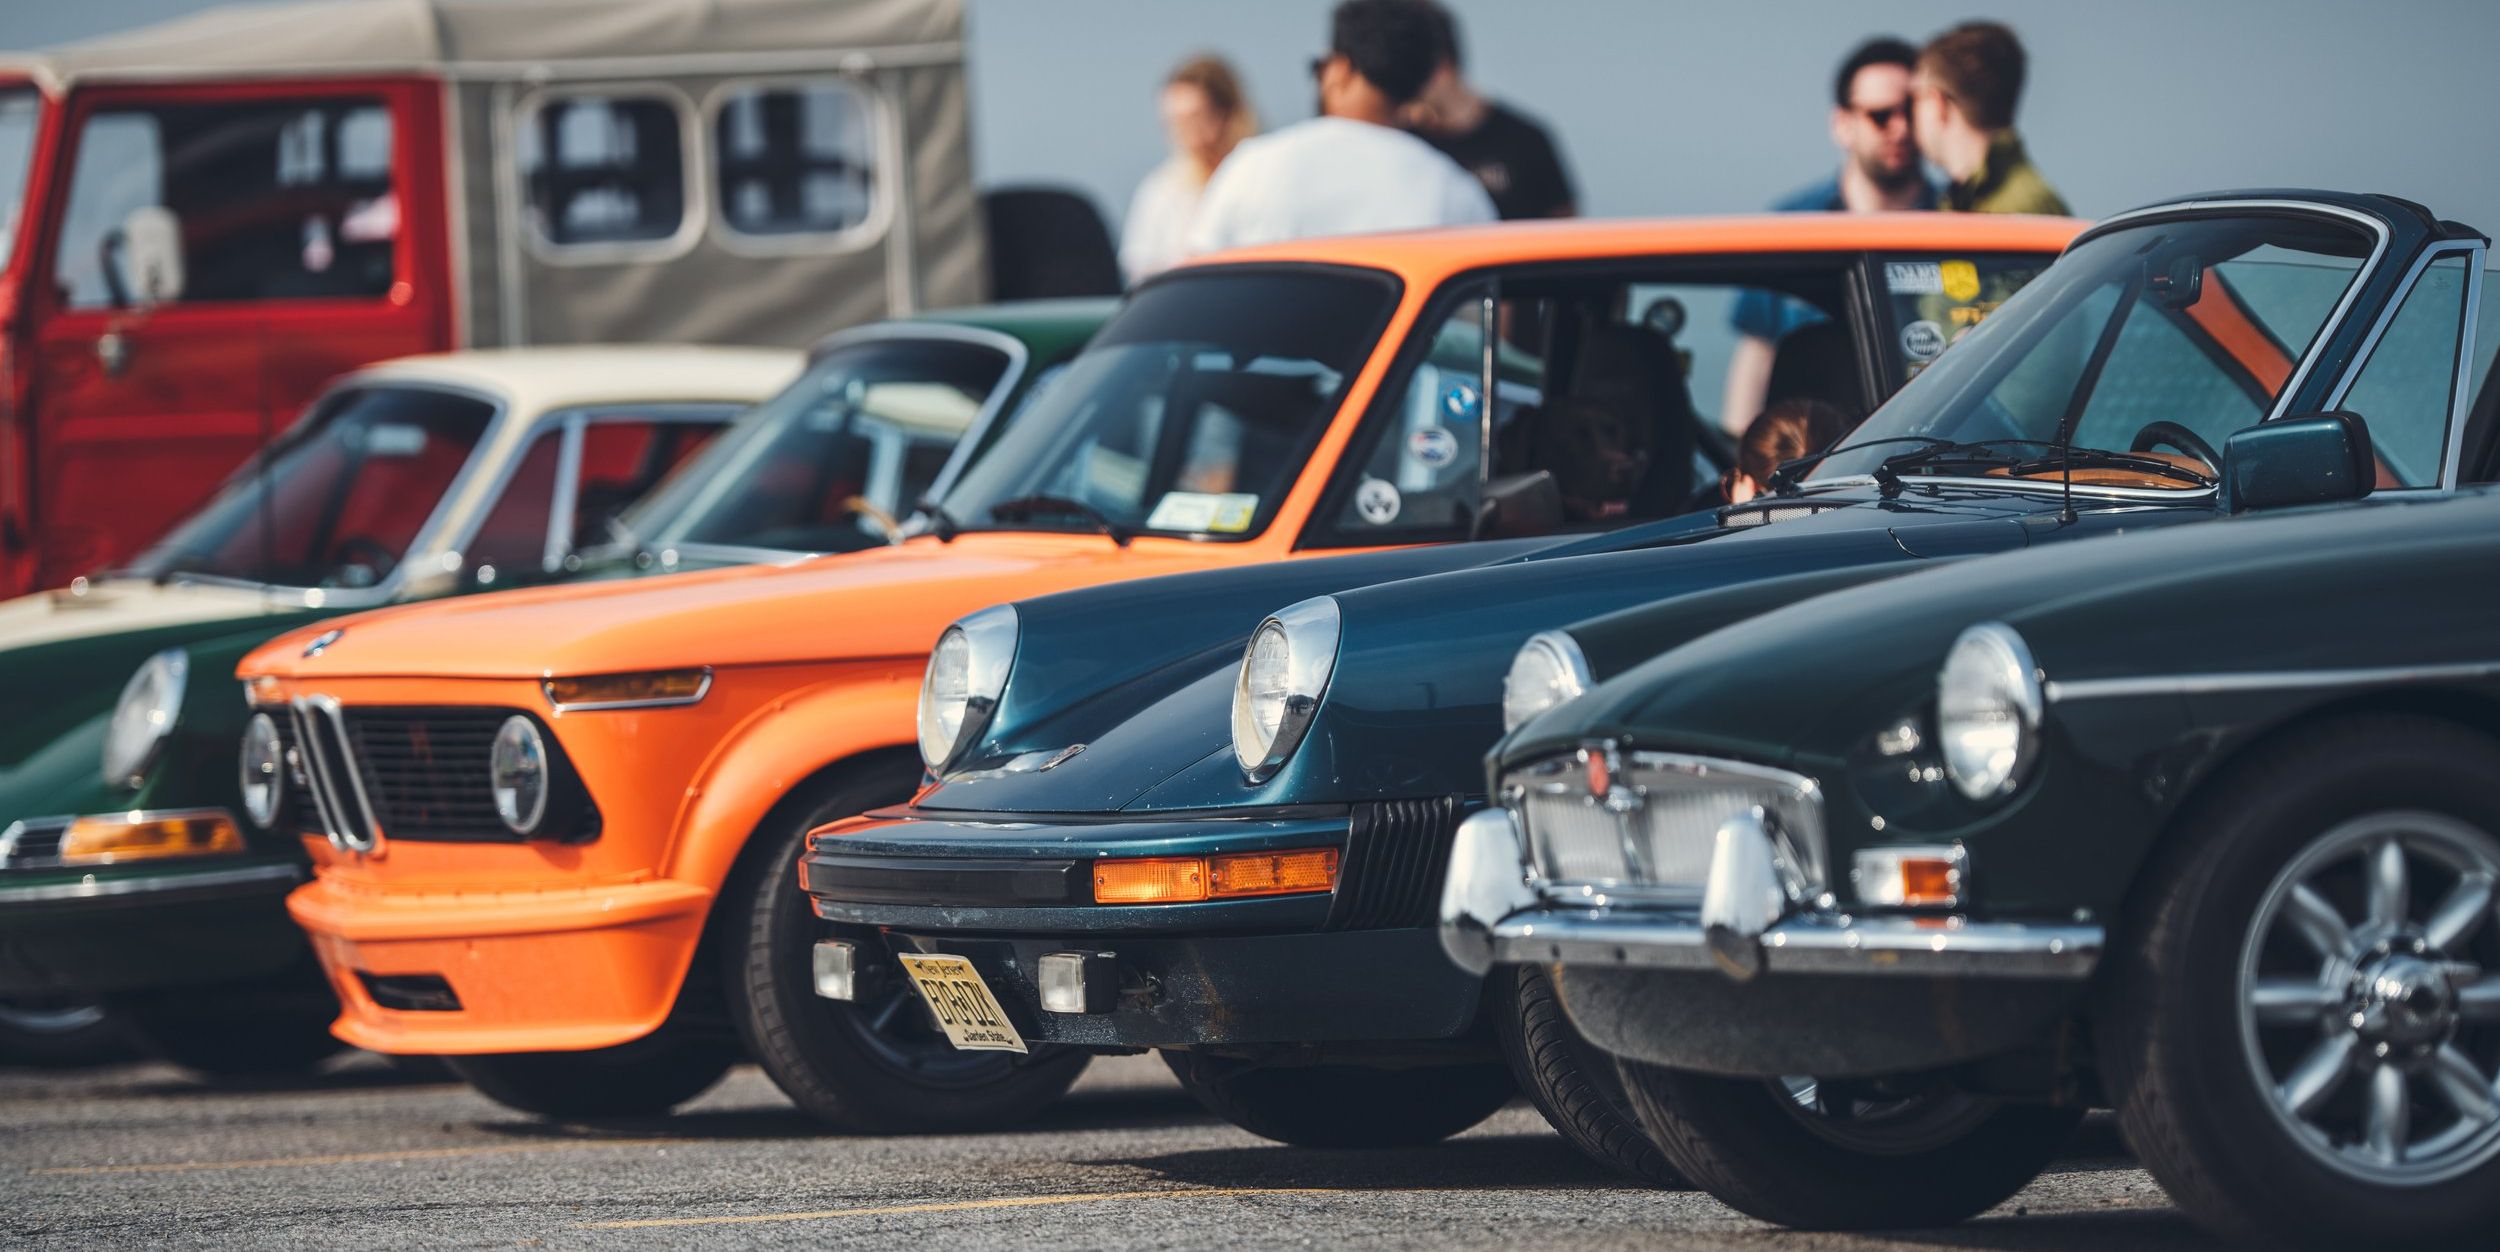 Celebrate This Incredible Era of Motorsports With Us at Our Next Cars & Coffee